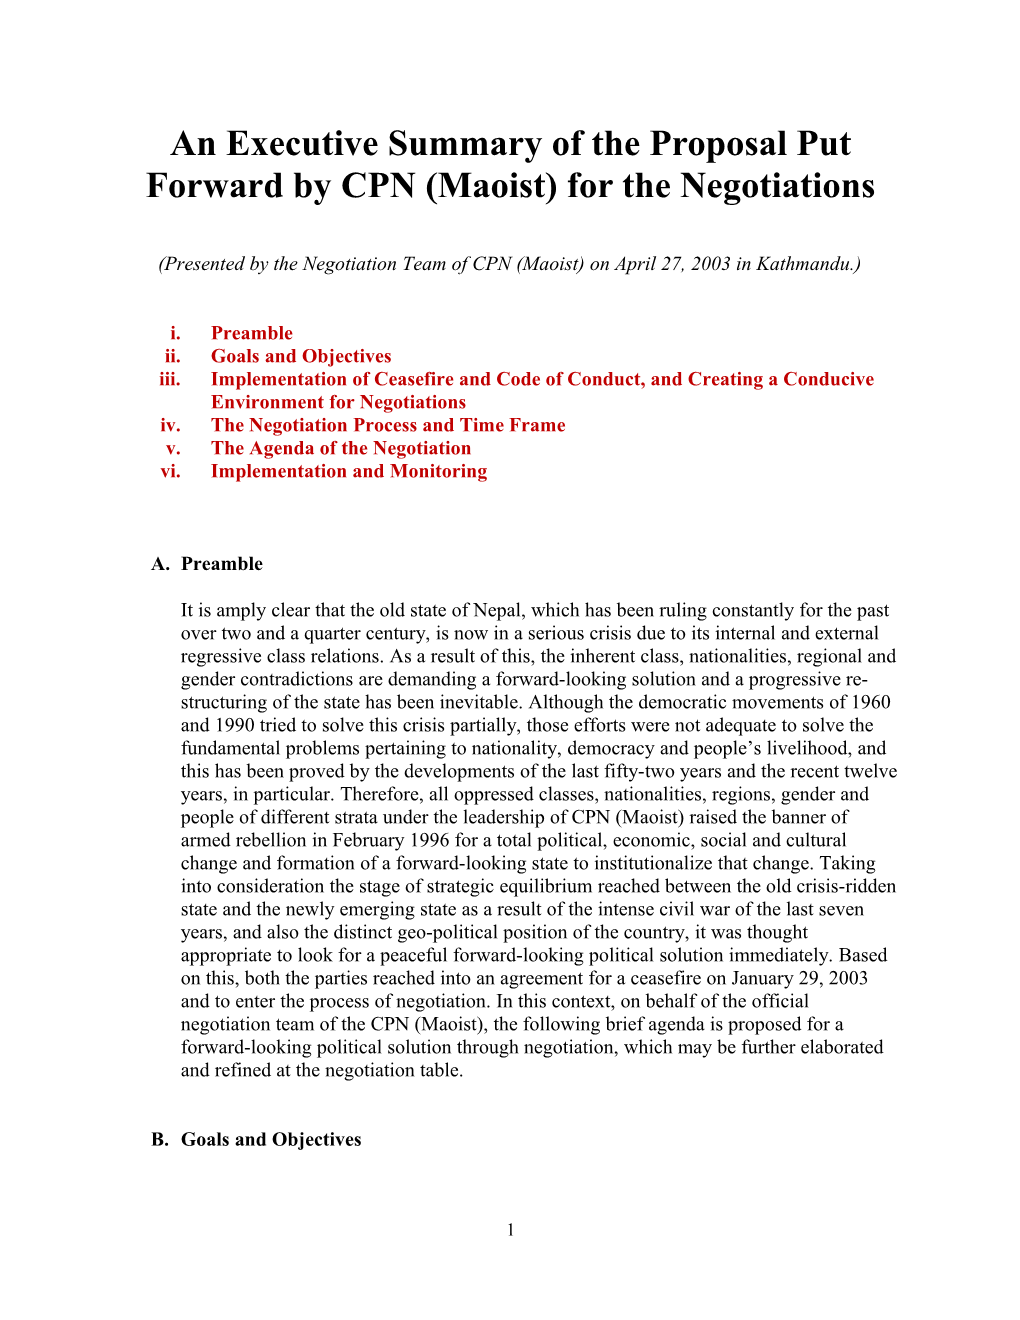 An Executive Summary of the Proposal Put Forward by CPN (Maoist) for the Negotiations